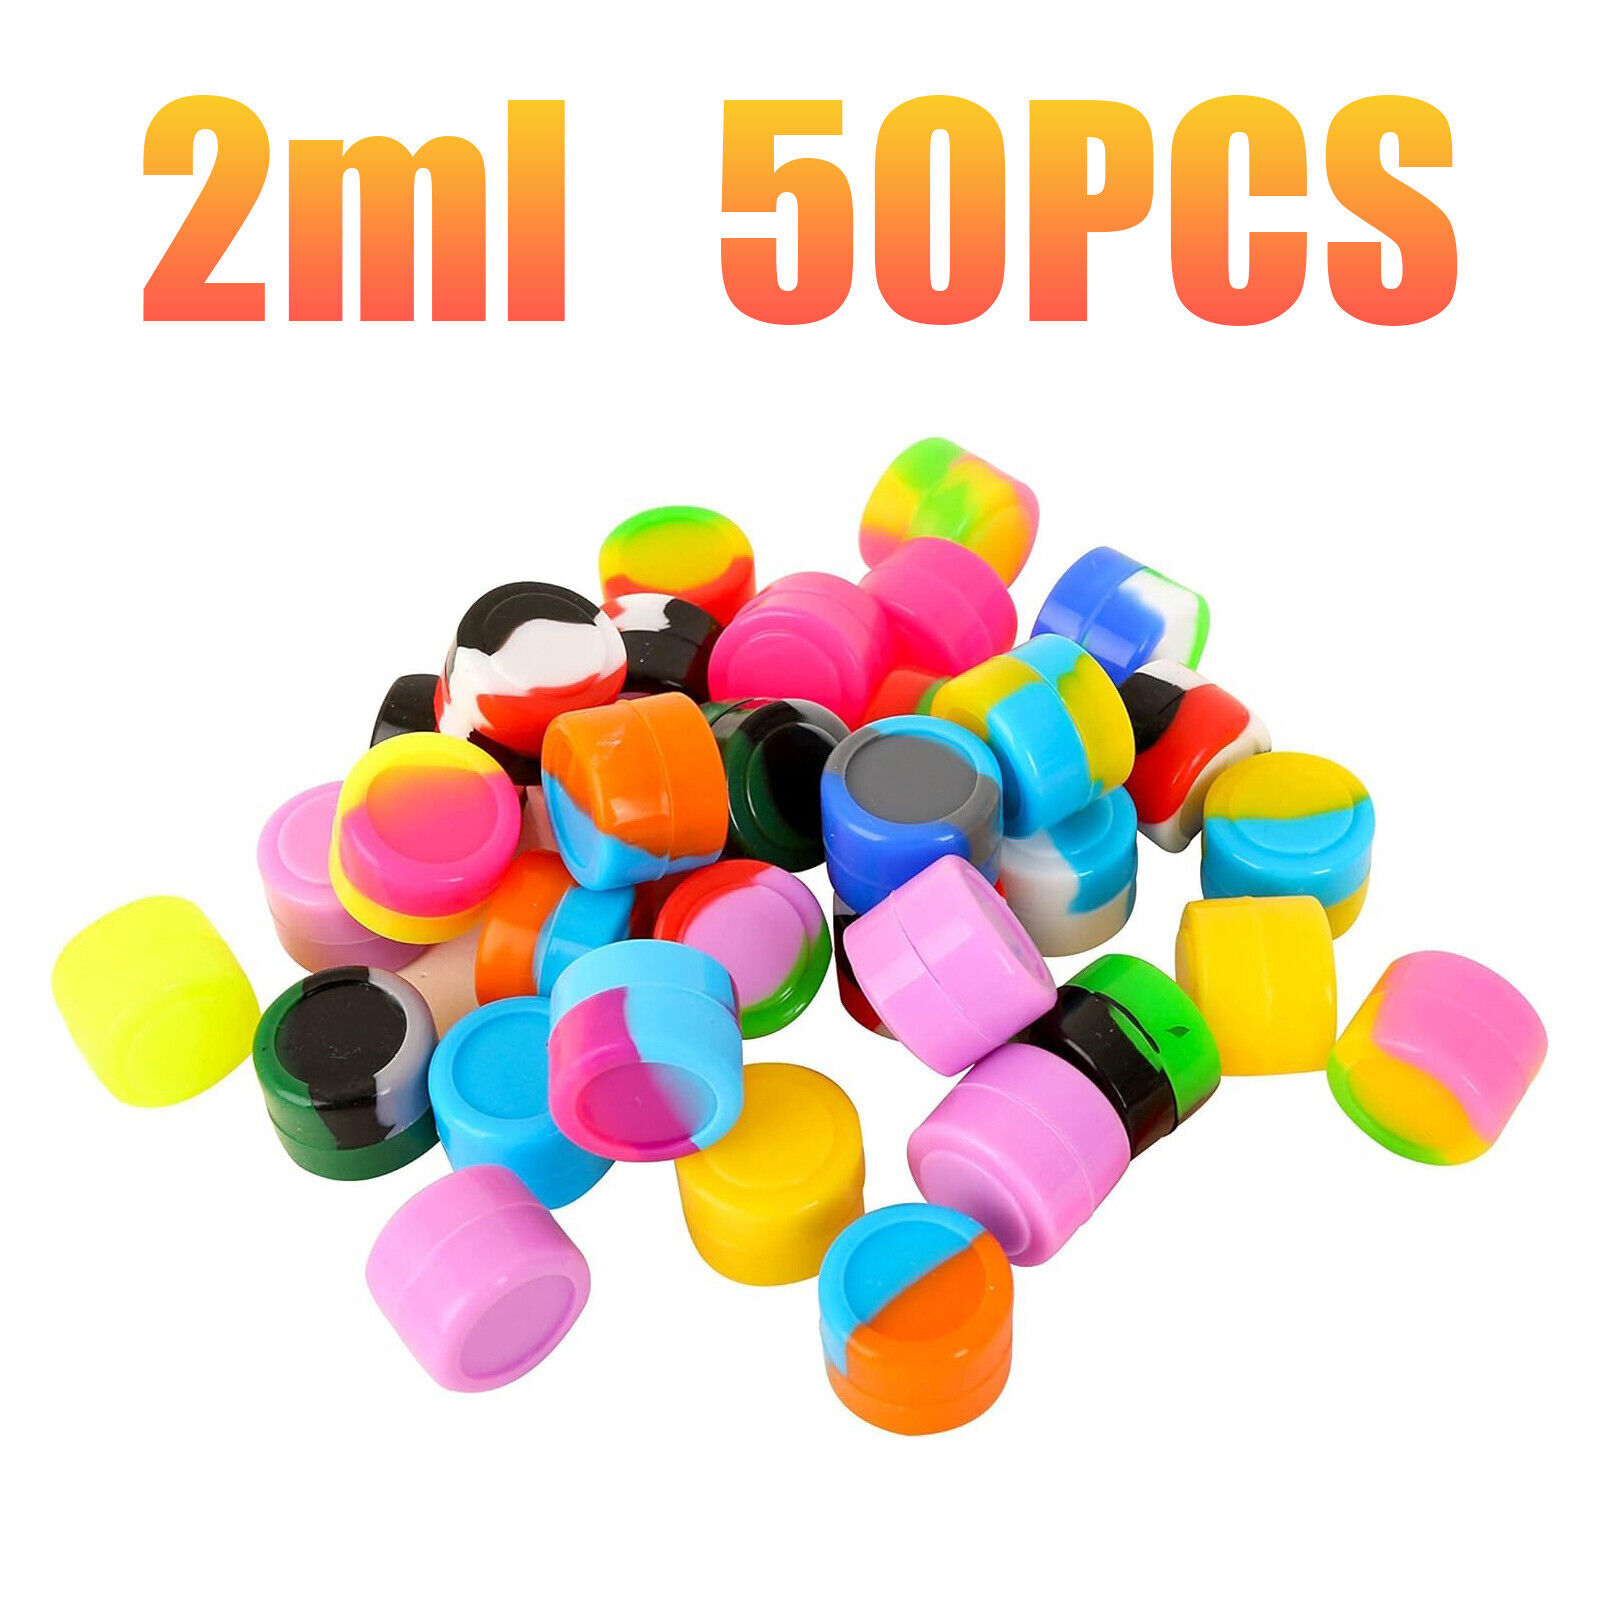 2ml Silicone Container Jar Mixed Colors Round Non-Stick Wholesale Lot 50 Pcs